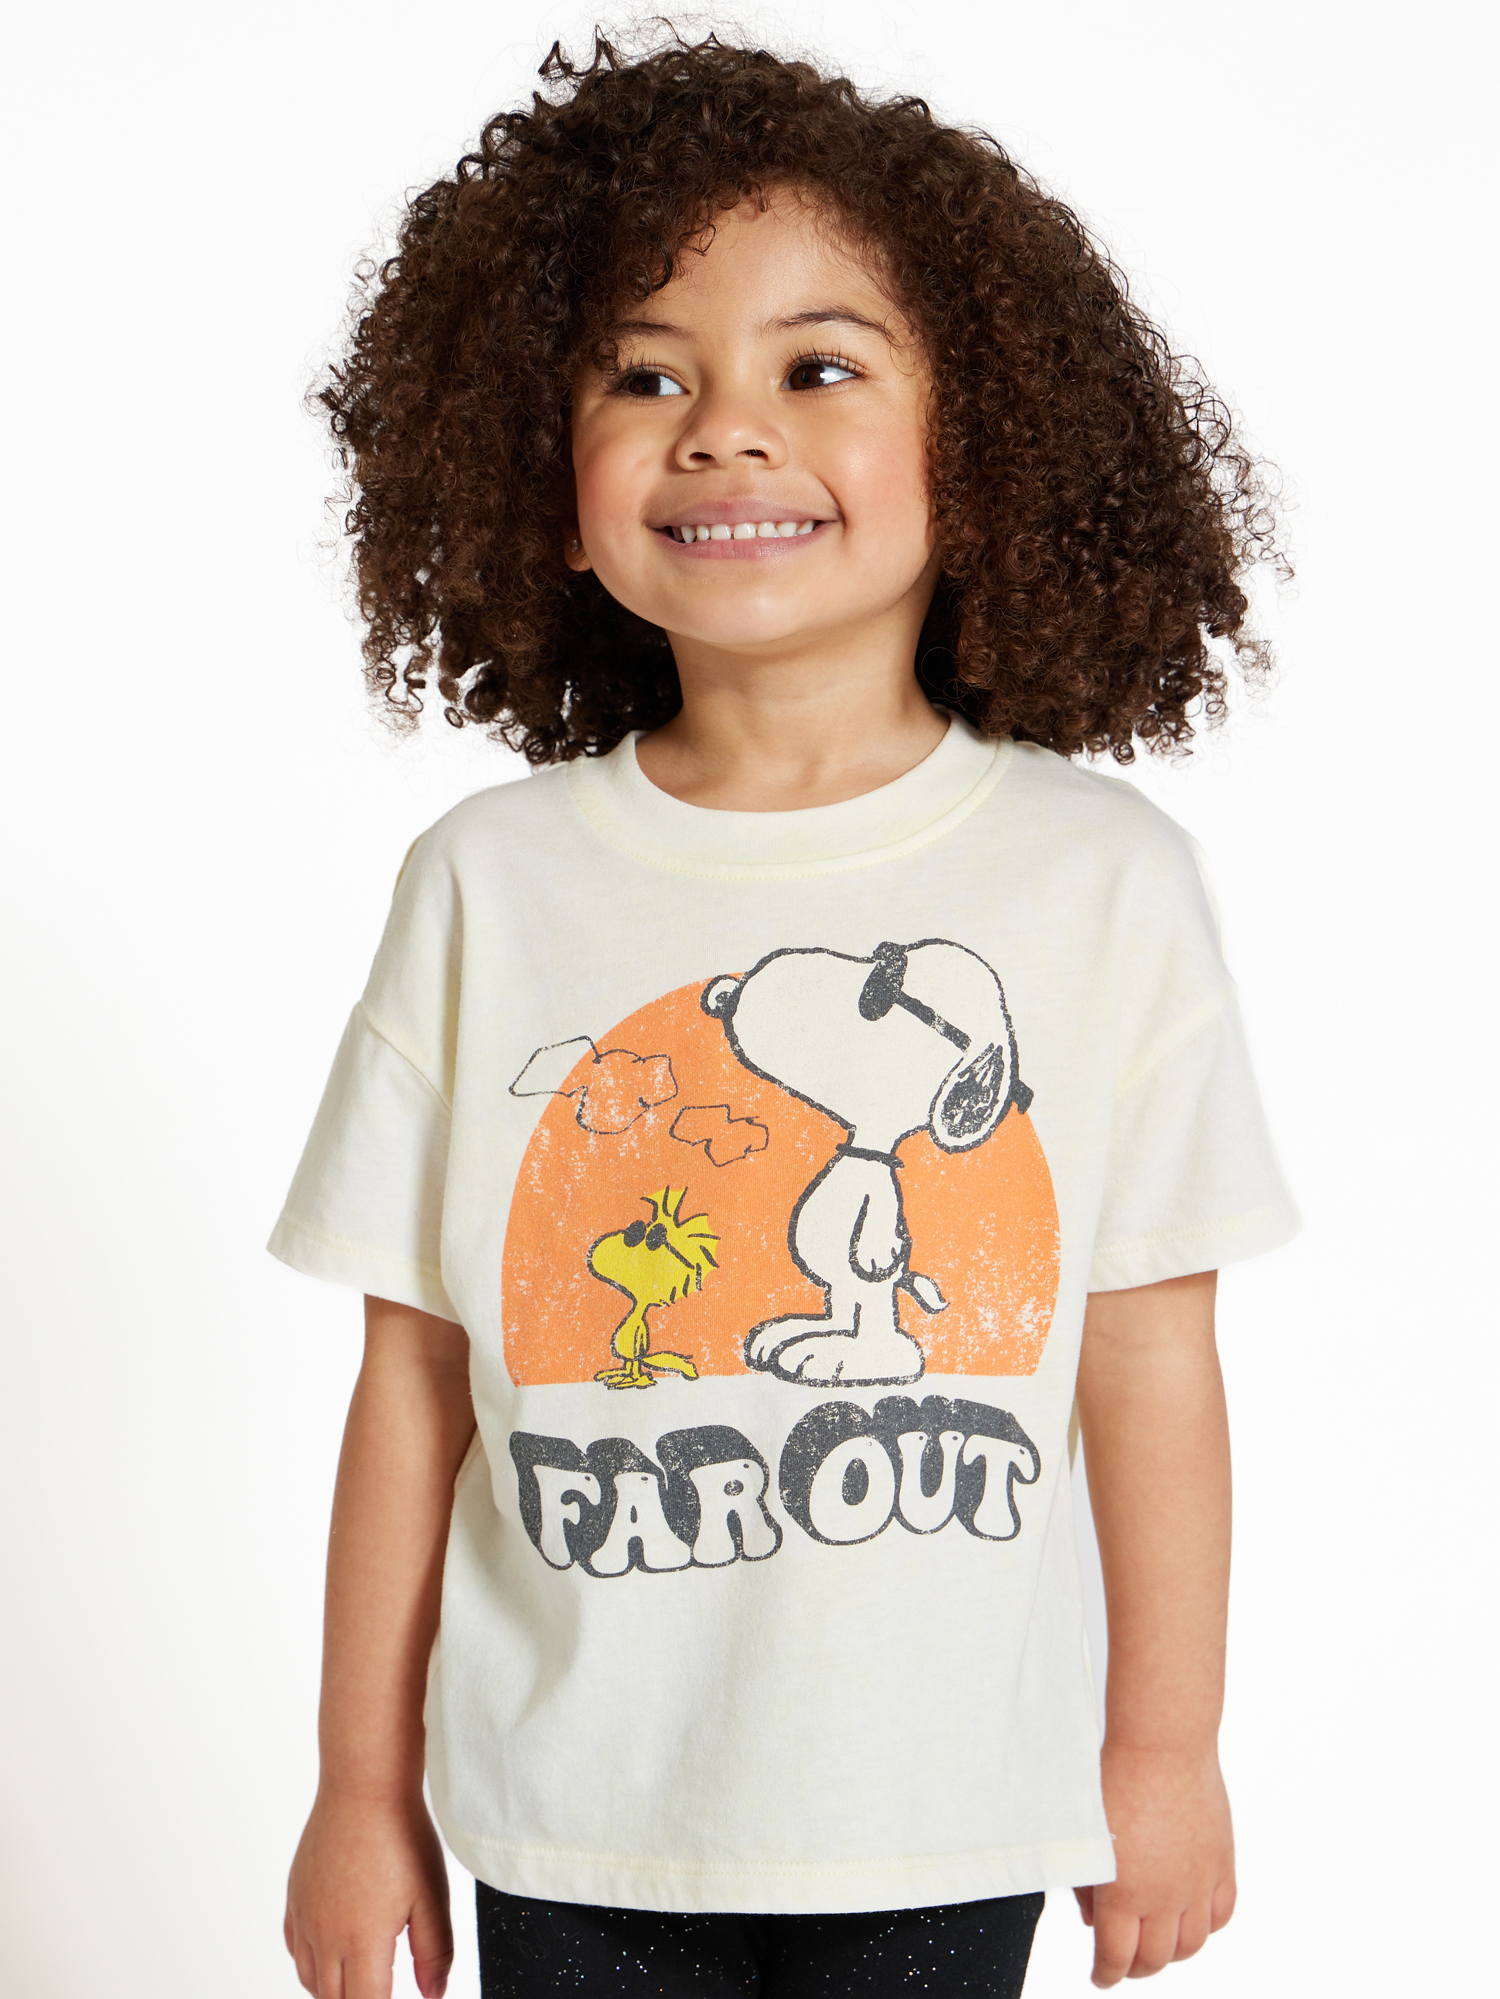 Peanuts Snoopy Toddler Boy Graphic Tees, 2-Pack, Sizes 2T-5T - image 4 of 8